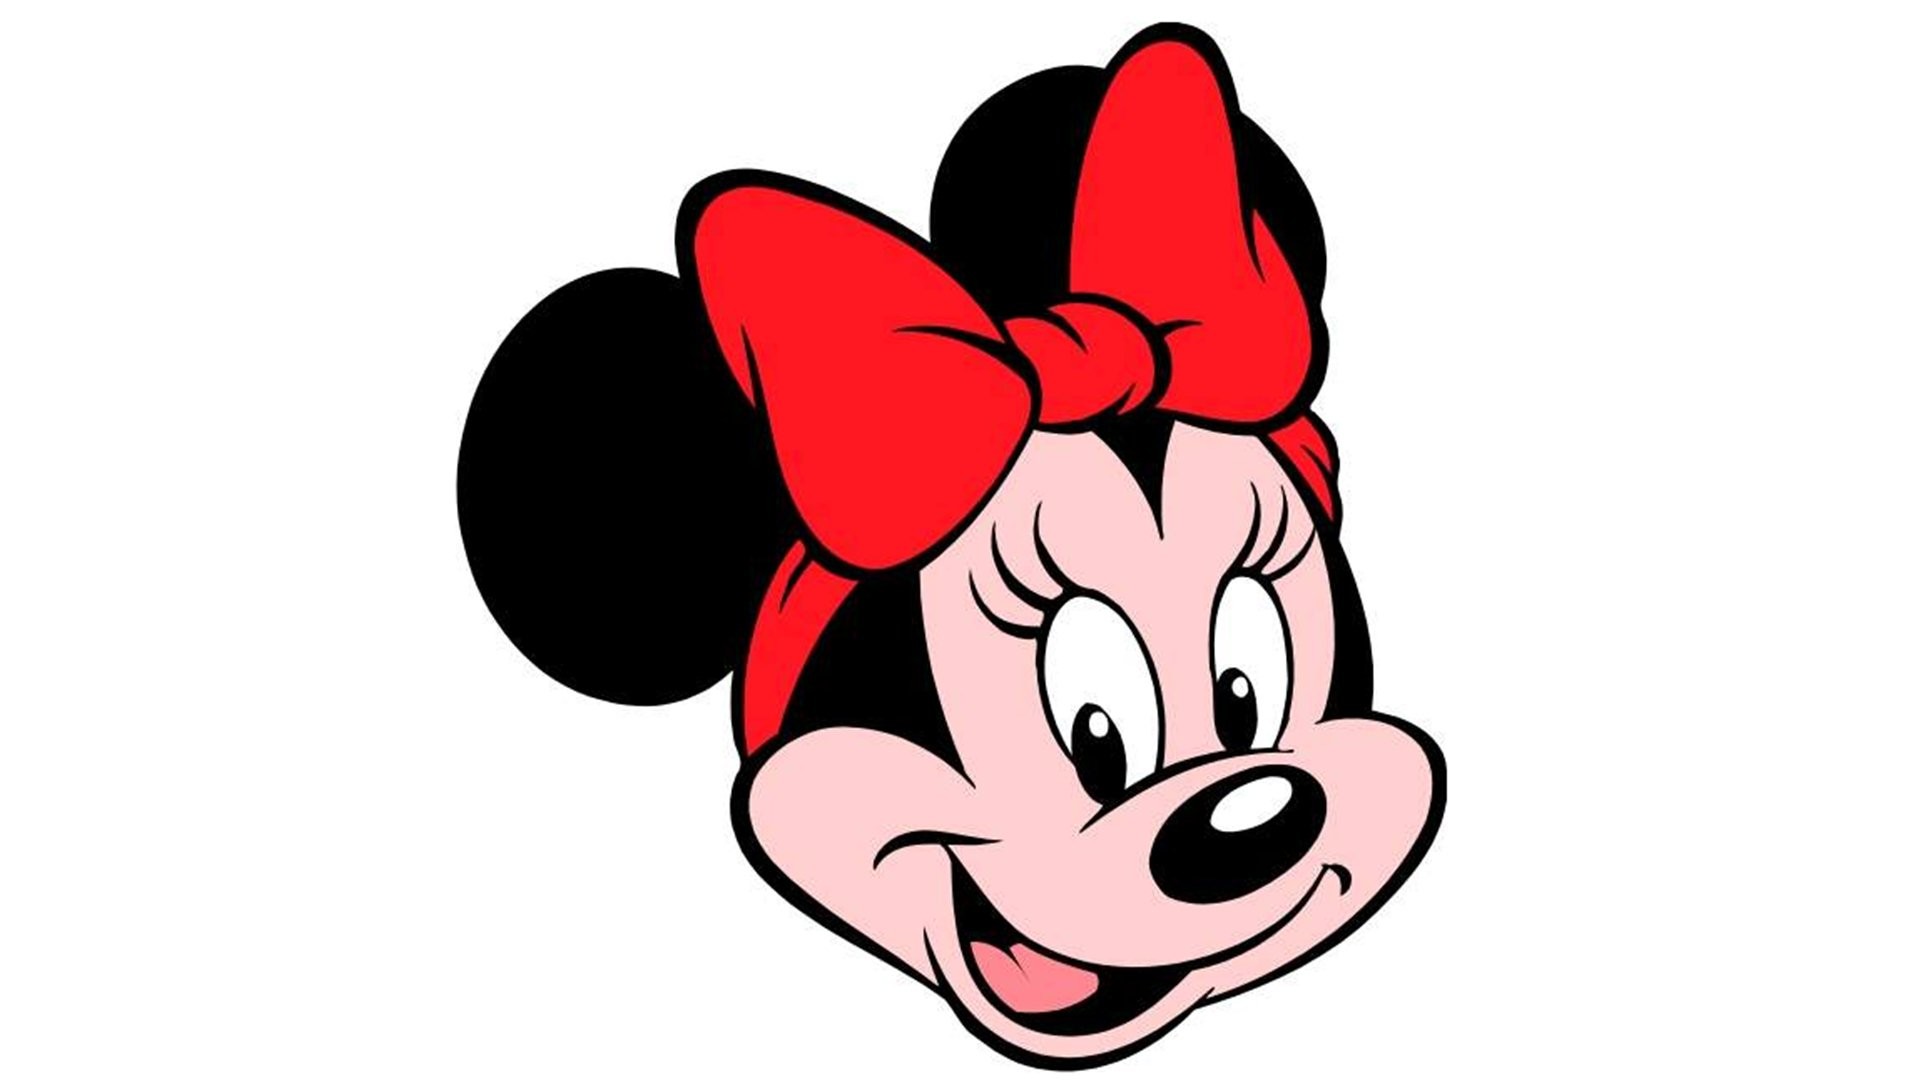 1920x1080 Minnie Mouse Wallpapers - Cartoons Wallpapers